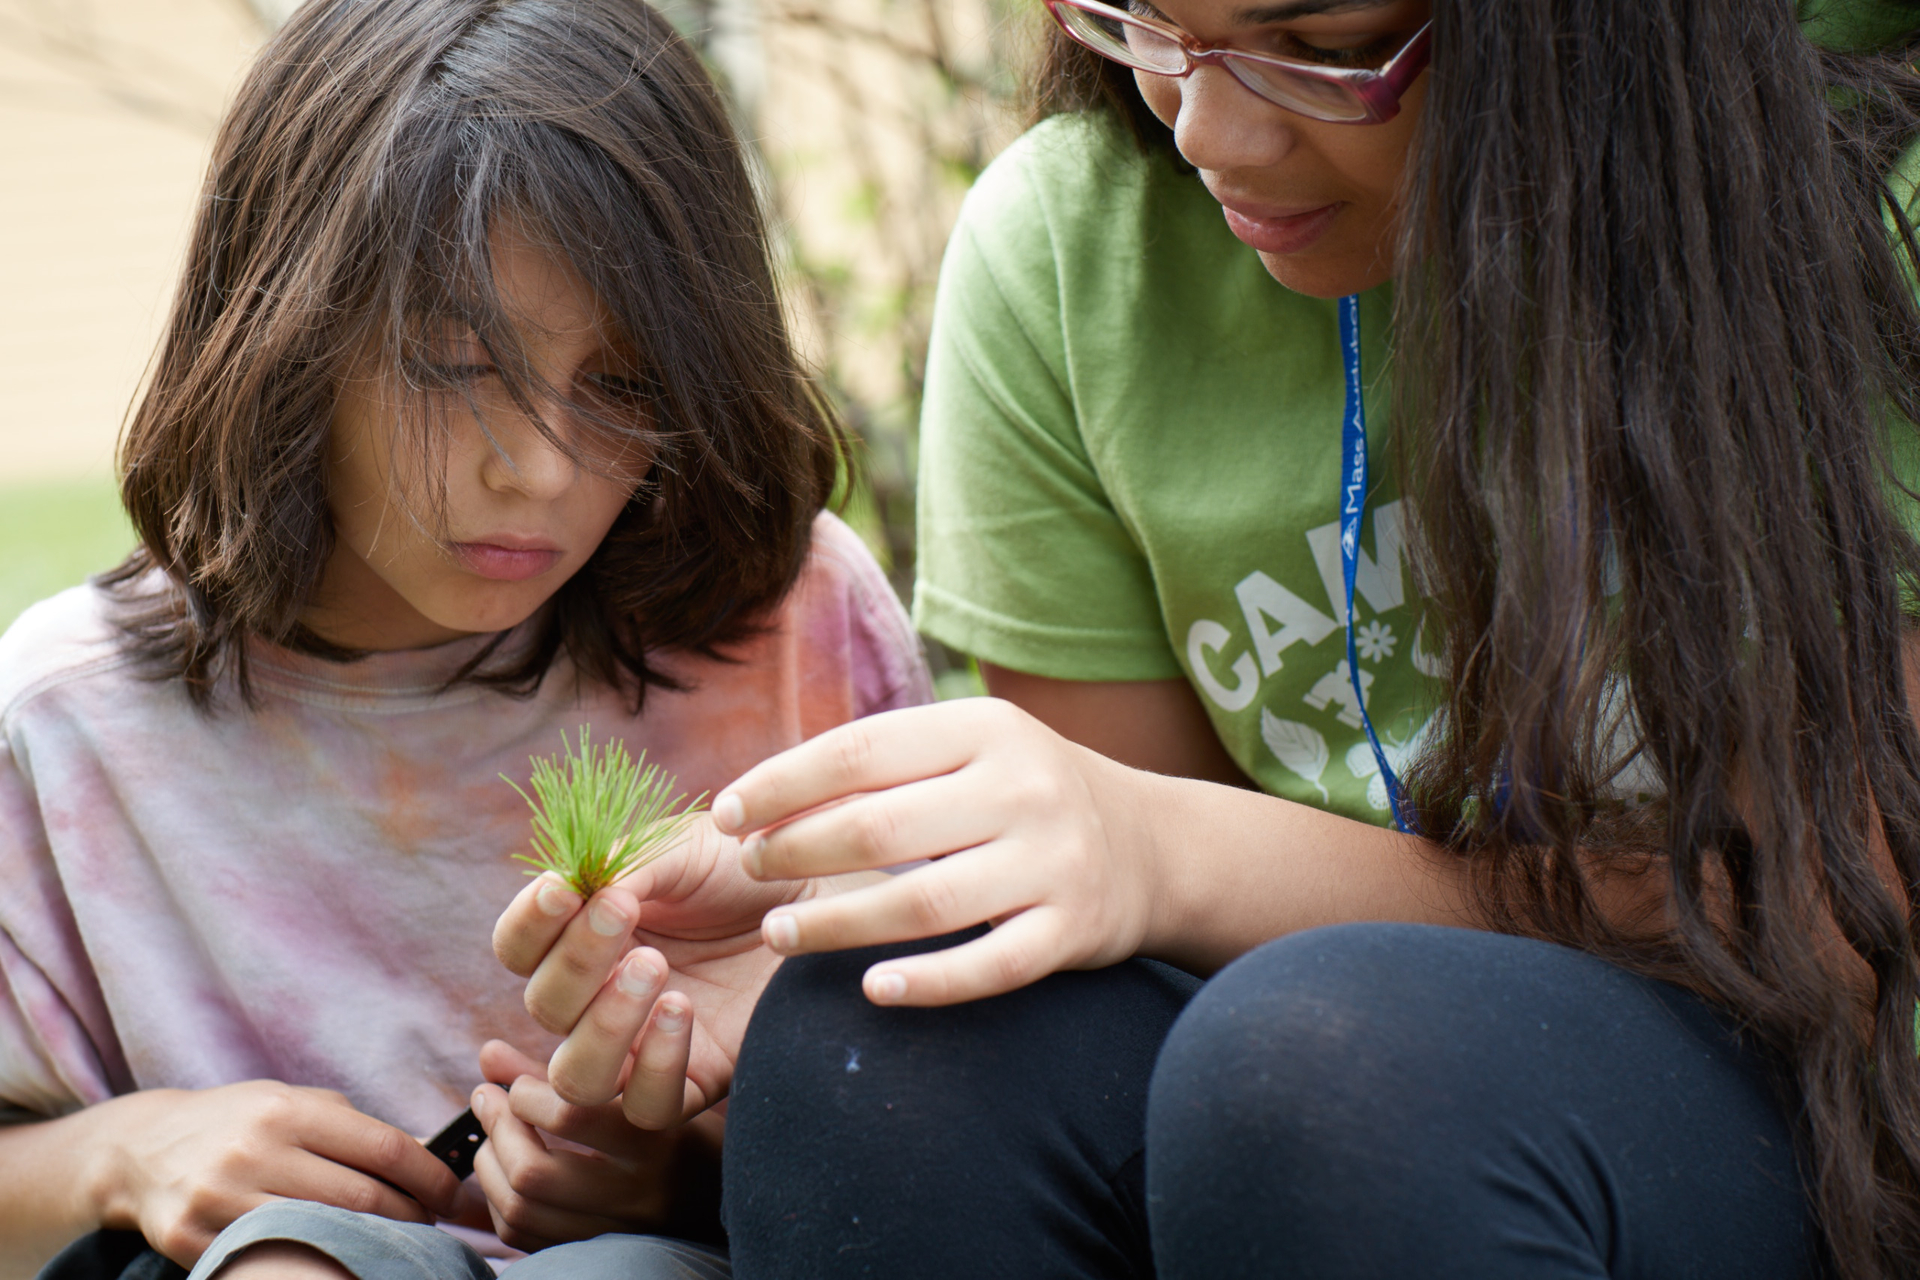 A counselor-in-training at Boston Nature Center Camp shows a camper a small bunch of conifer needles